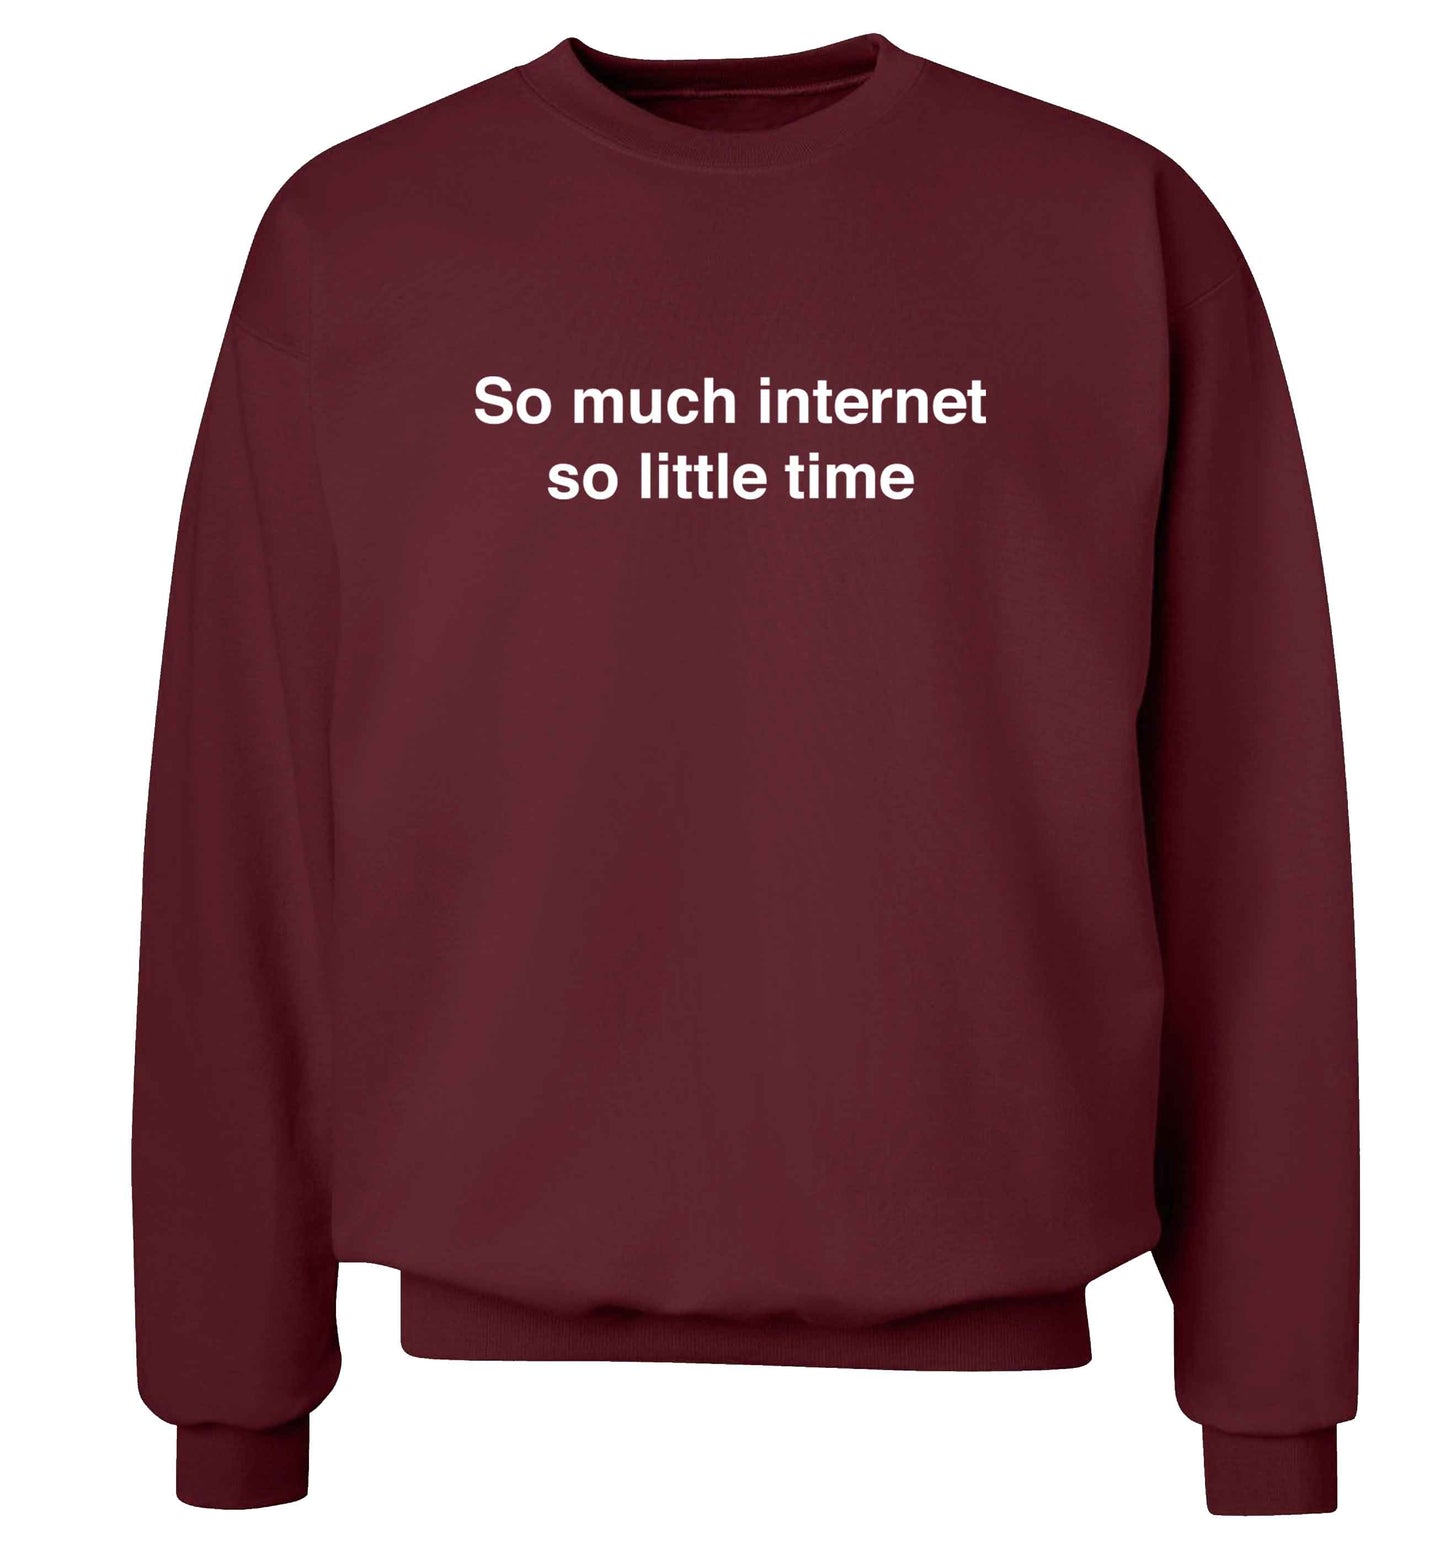 So much internet so little time adult's unisex maroon sweater 2XL